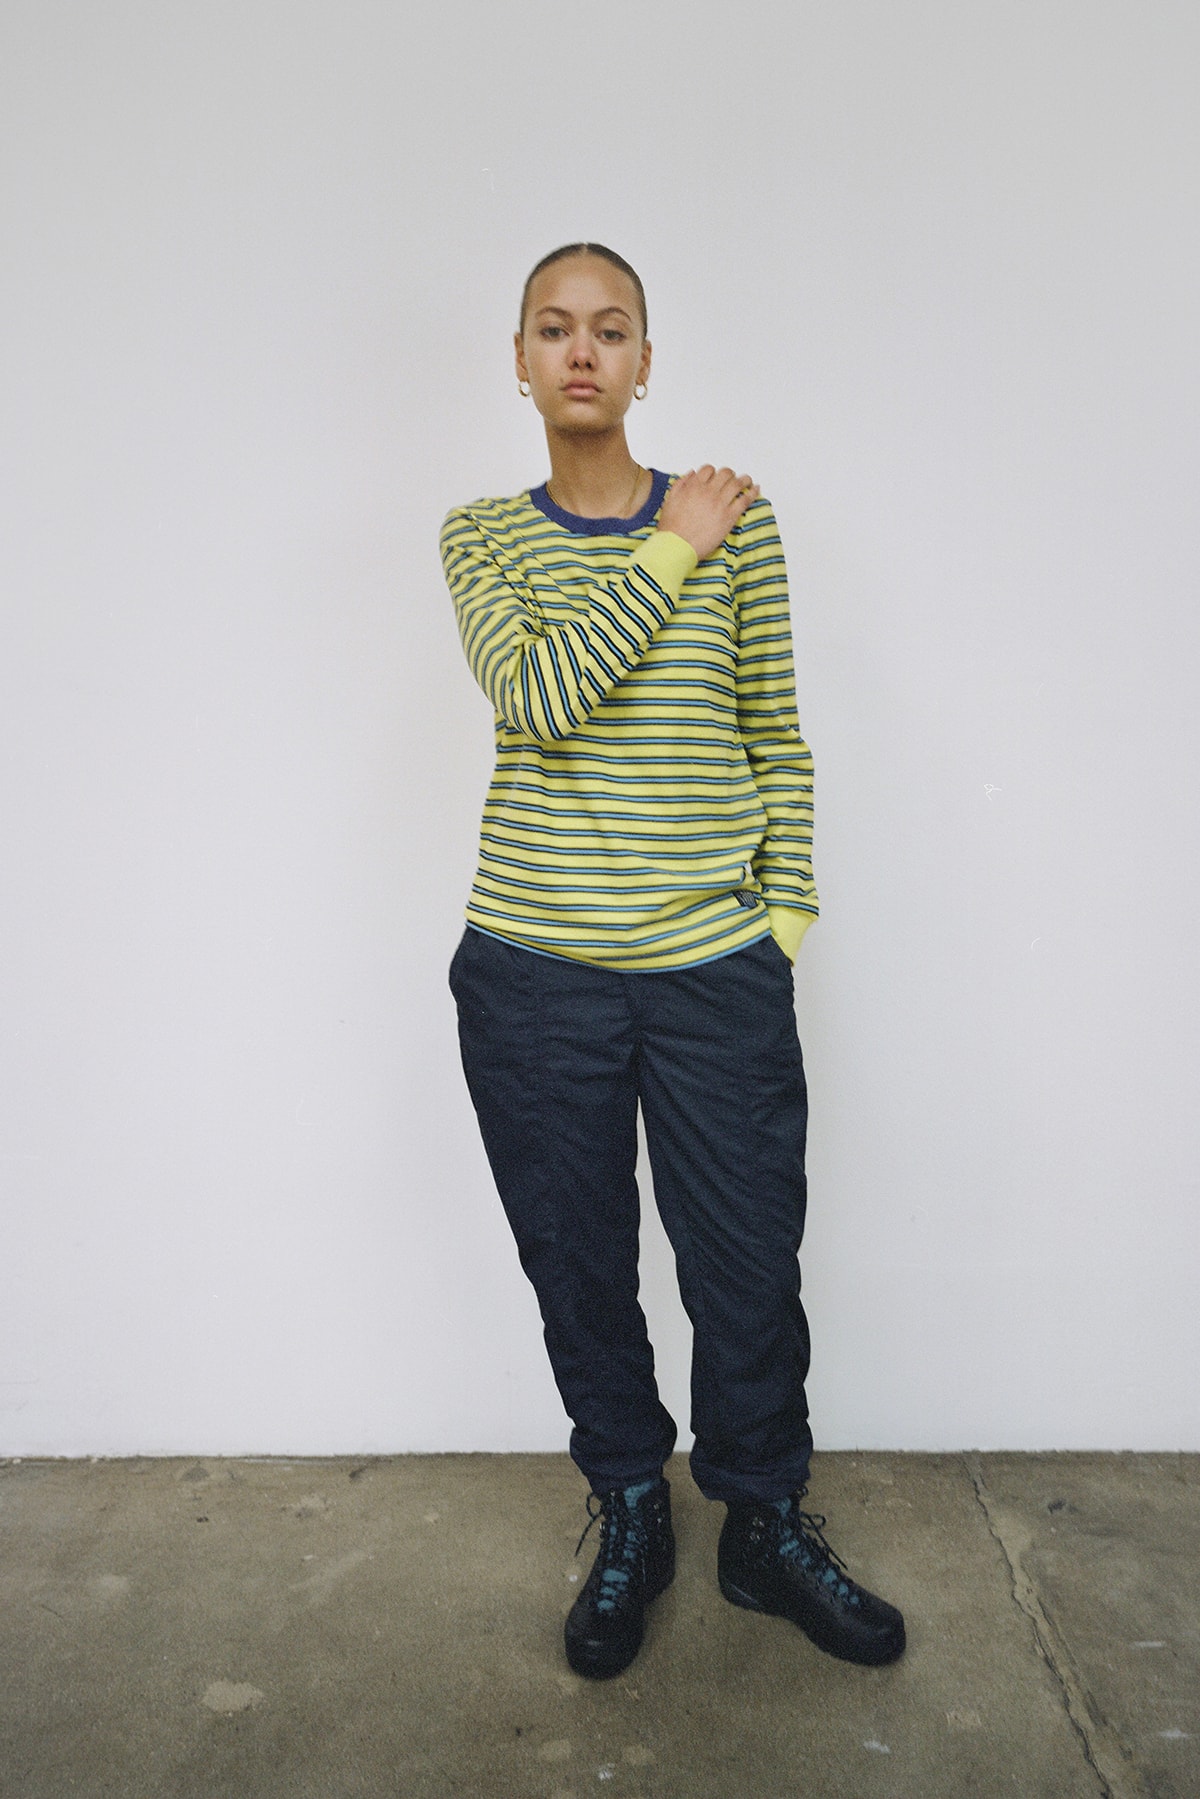 Stussy Women's Holiday 2018 Collection Lookbook Dress Striped Top Green Blue